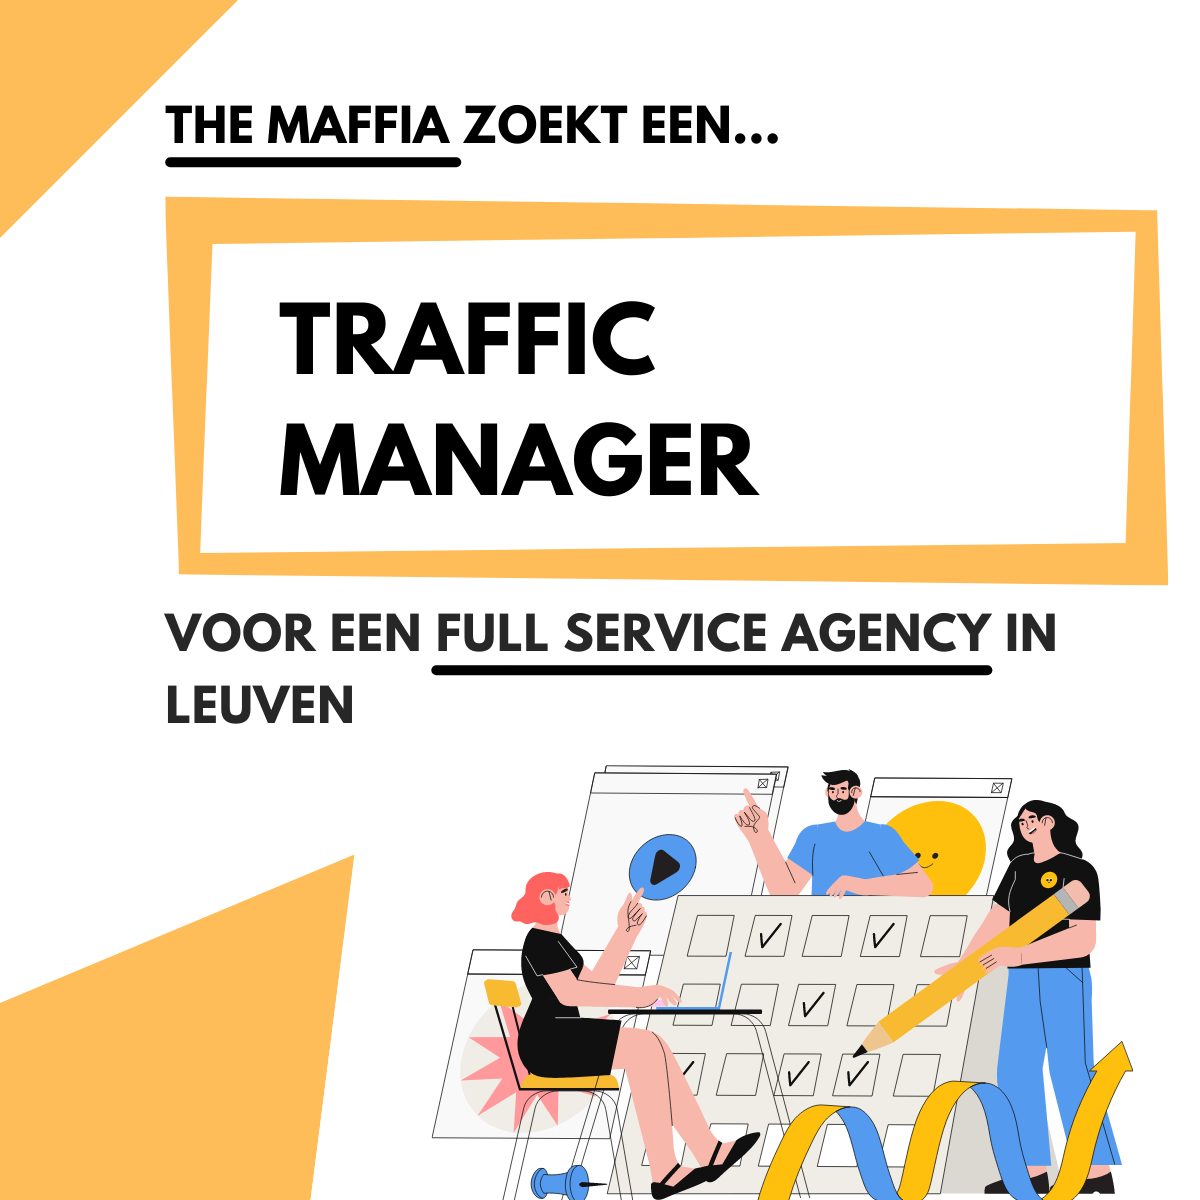 Traffic manager